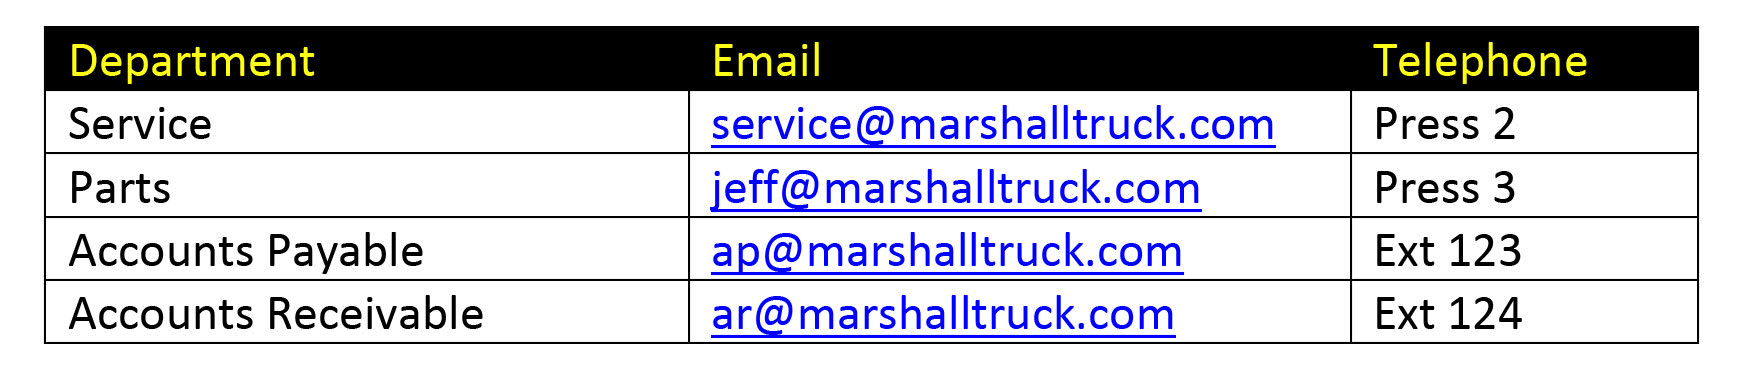 Marshall Truck Contact Information